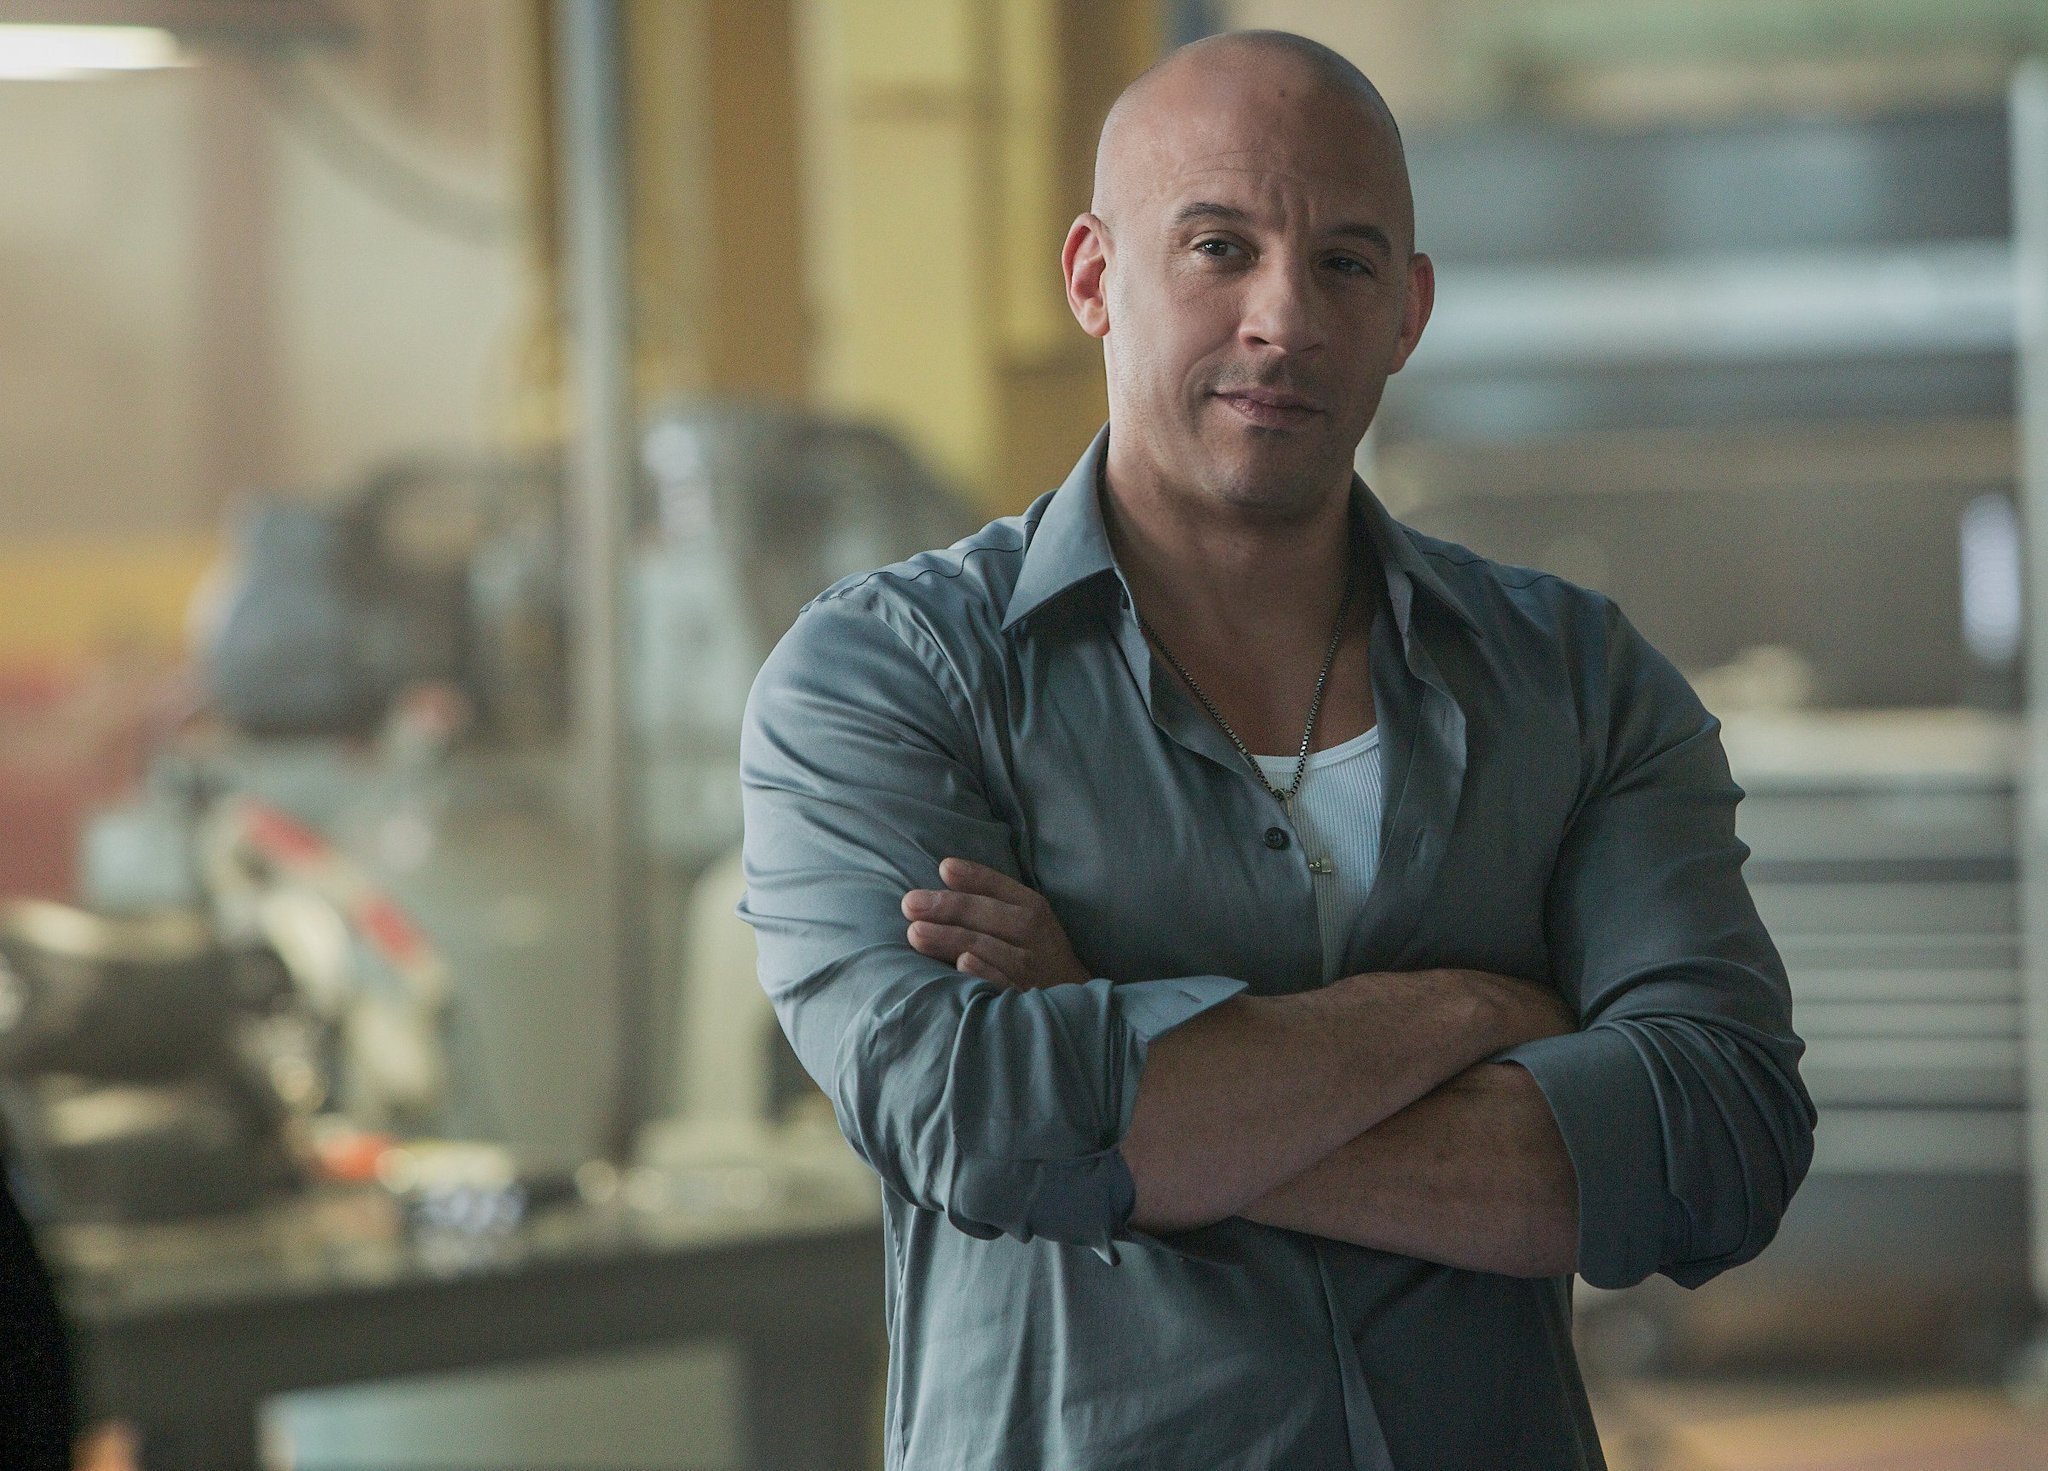 CinemaCon: 'Furious 8' will roll into theaters in April 2017